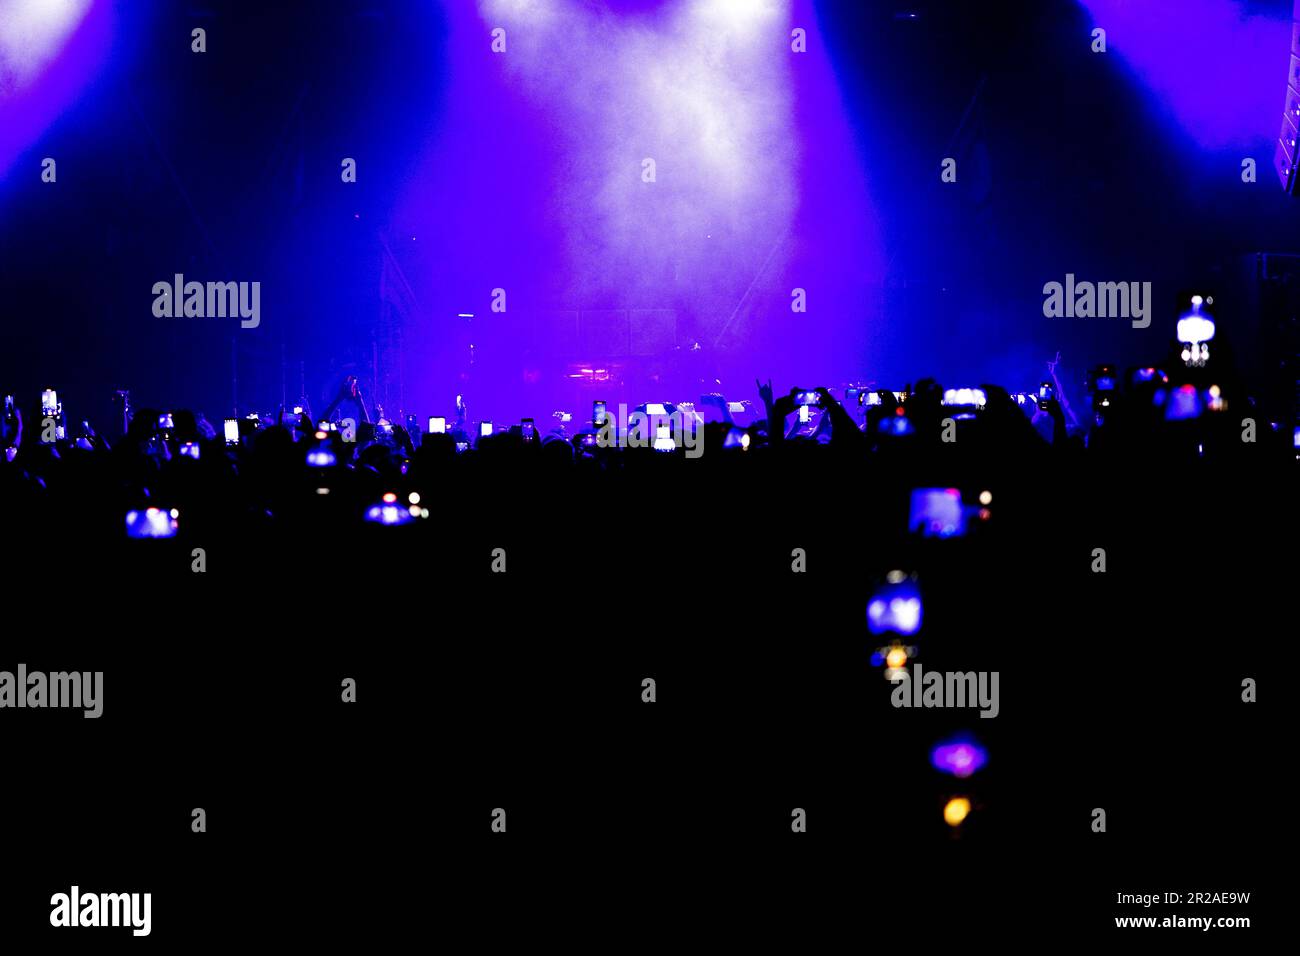 Alcatraz club Italy 17 May 2023 people using their phones to film and take pictures during a live gig concert show Milan © Andrea Ripamonti / Alamy Stock Photo